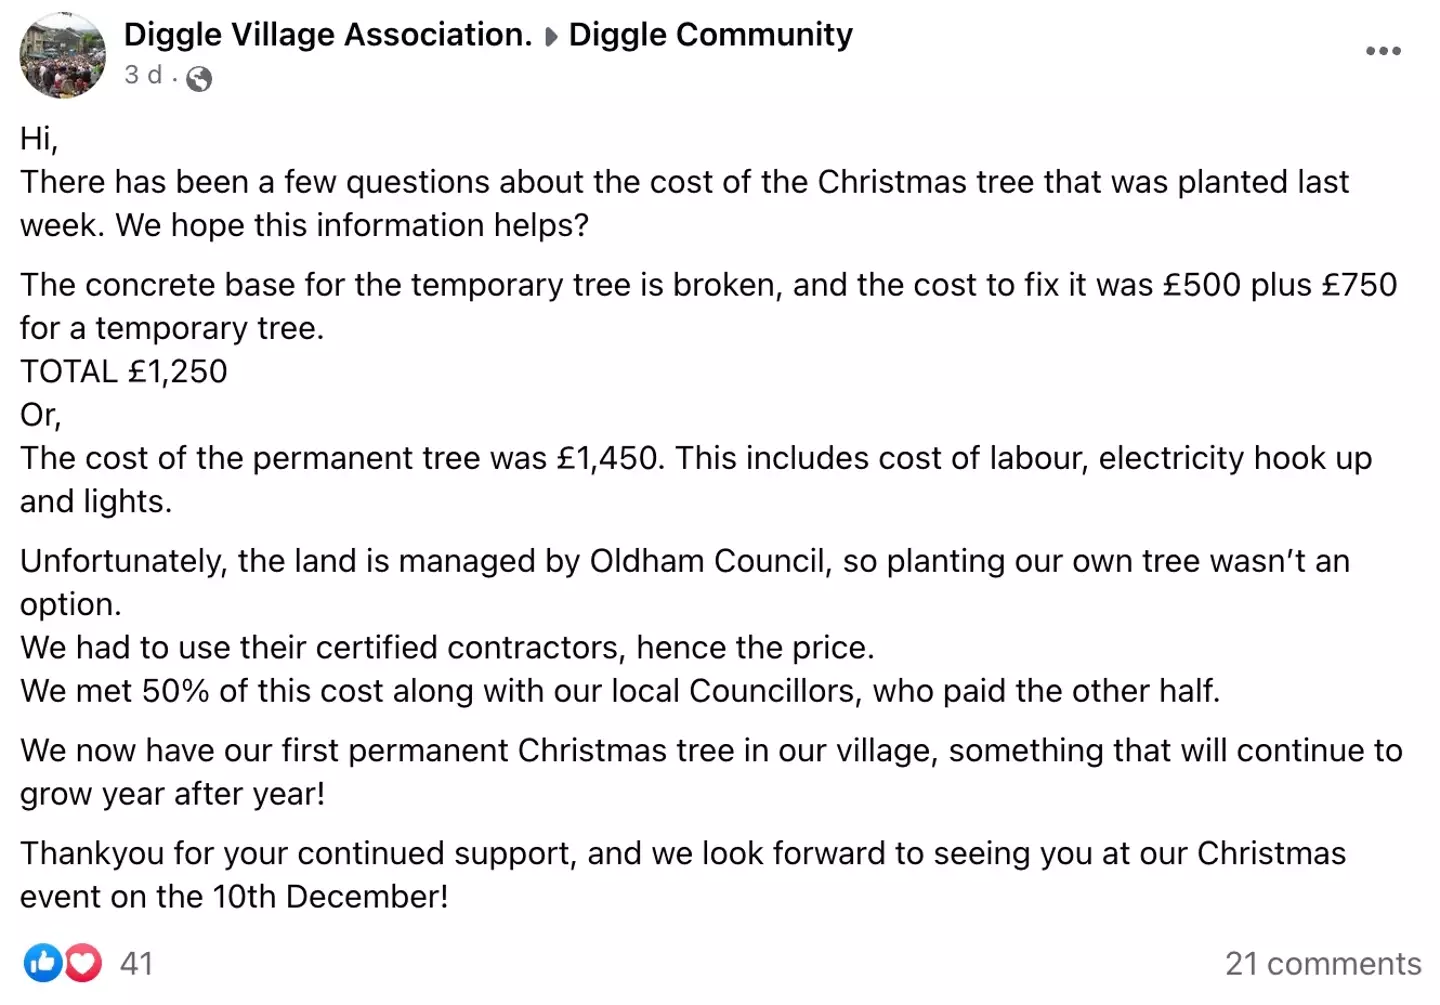 The Diggle Village Association justified their decision on Facebook.